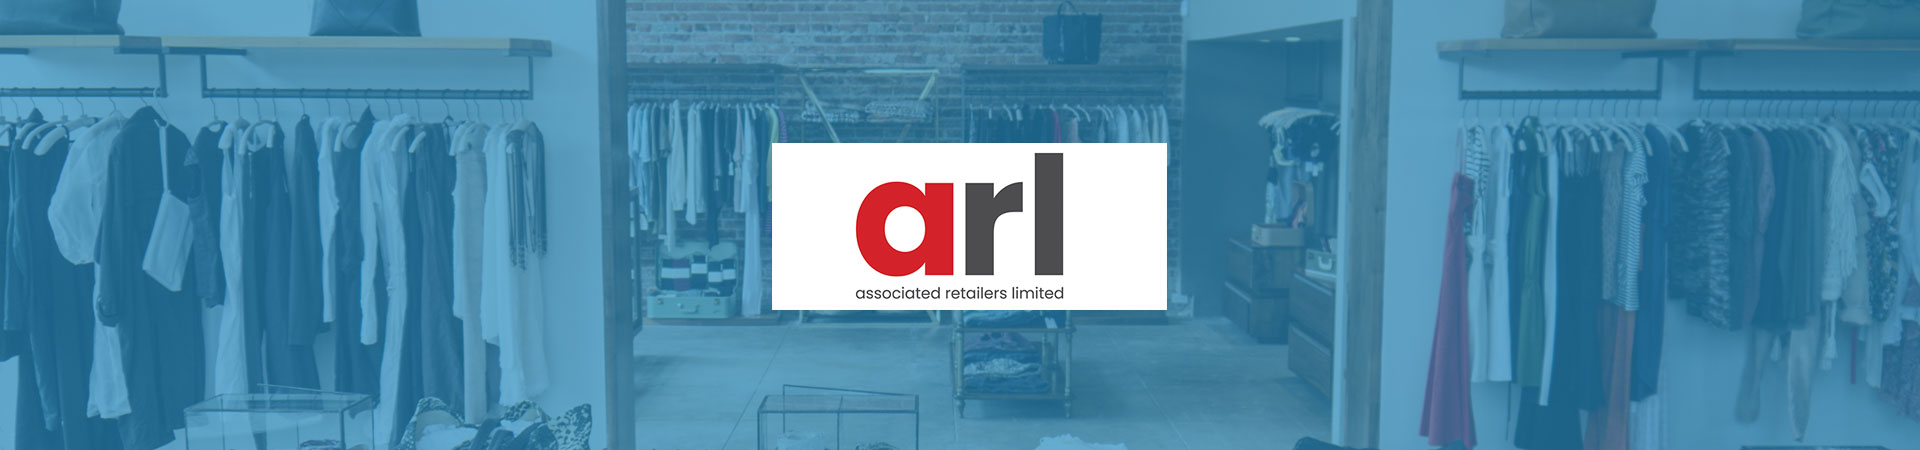 ARL - associated retailers limited